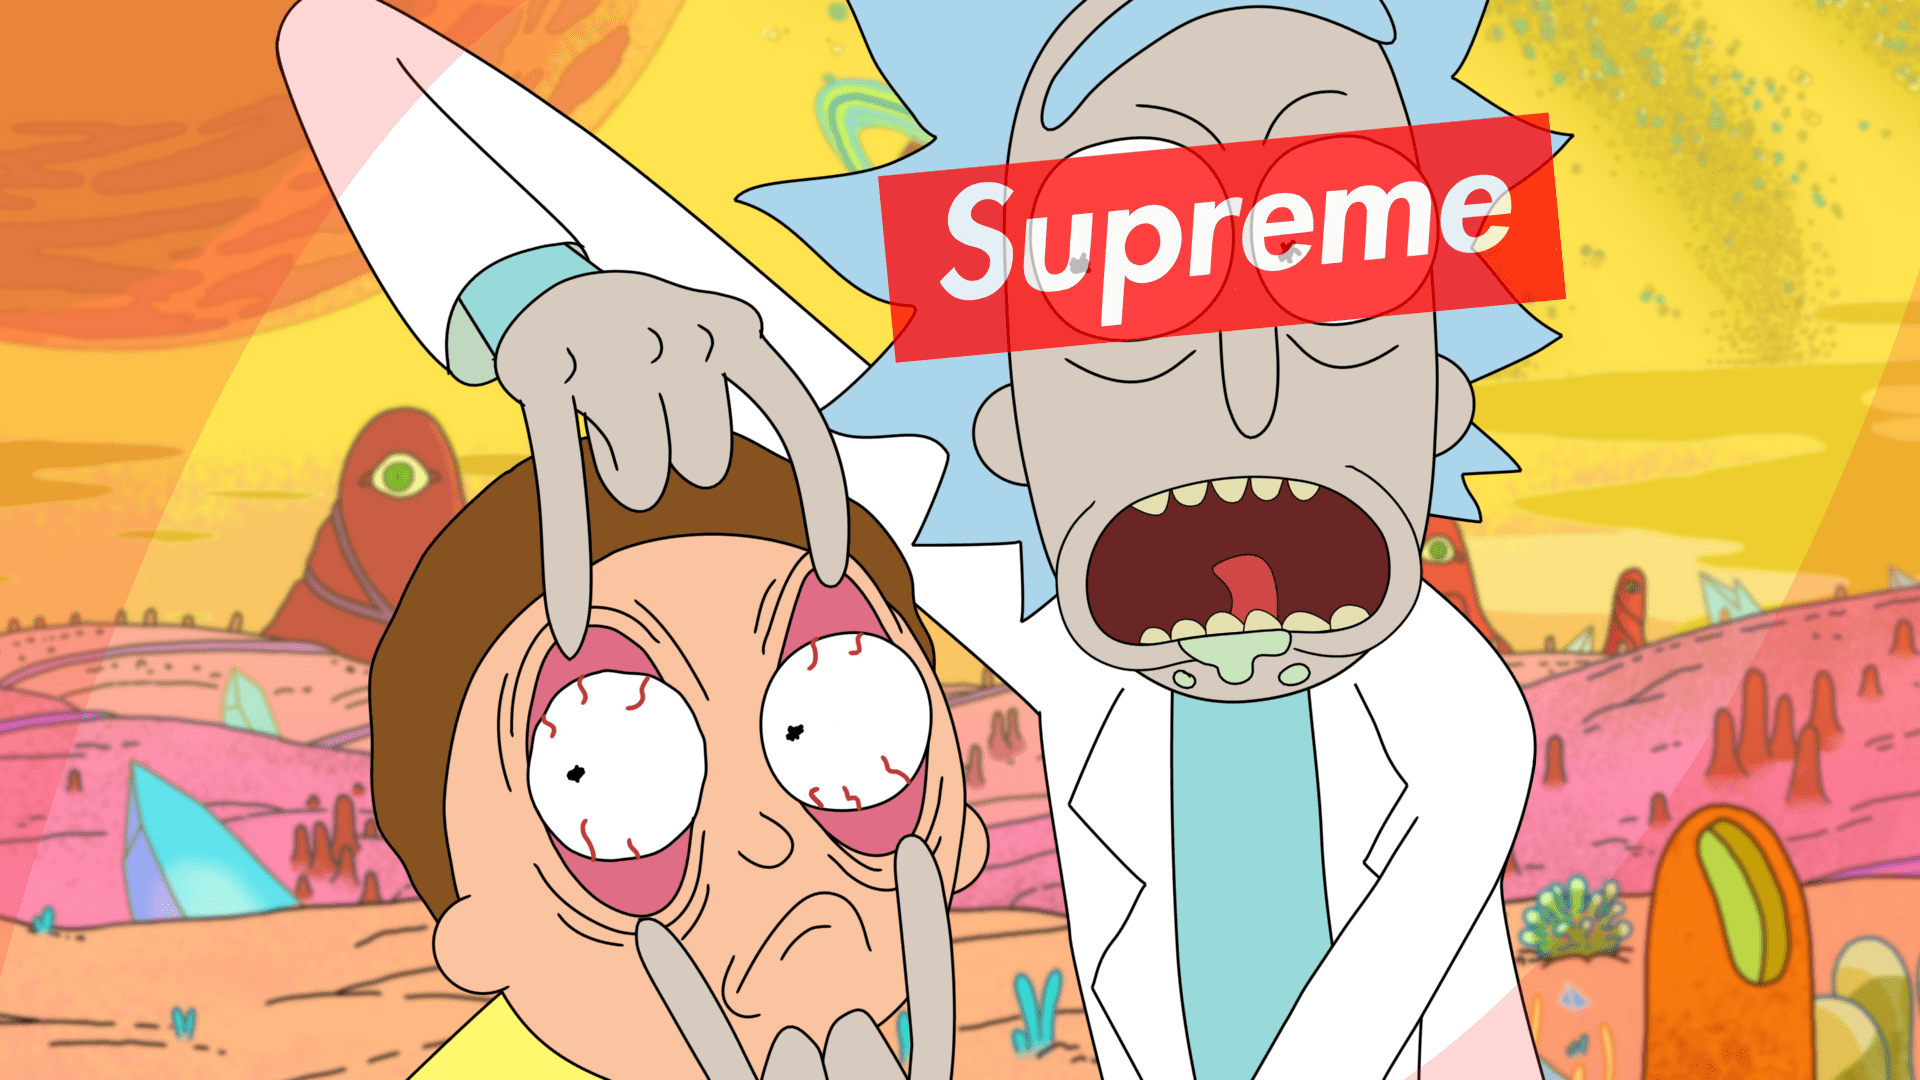 Rick and Morty x Supreme Wallpaper iPhone  Cartoon wallpaper, Supreme  wallpaper, Iphone wallpaper rick and morty